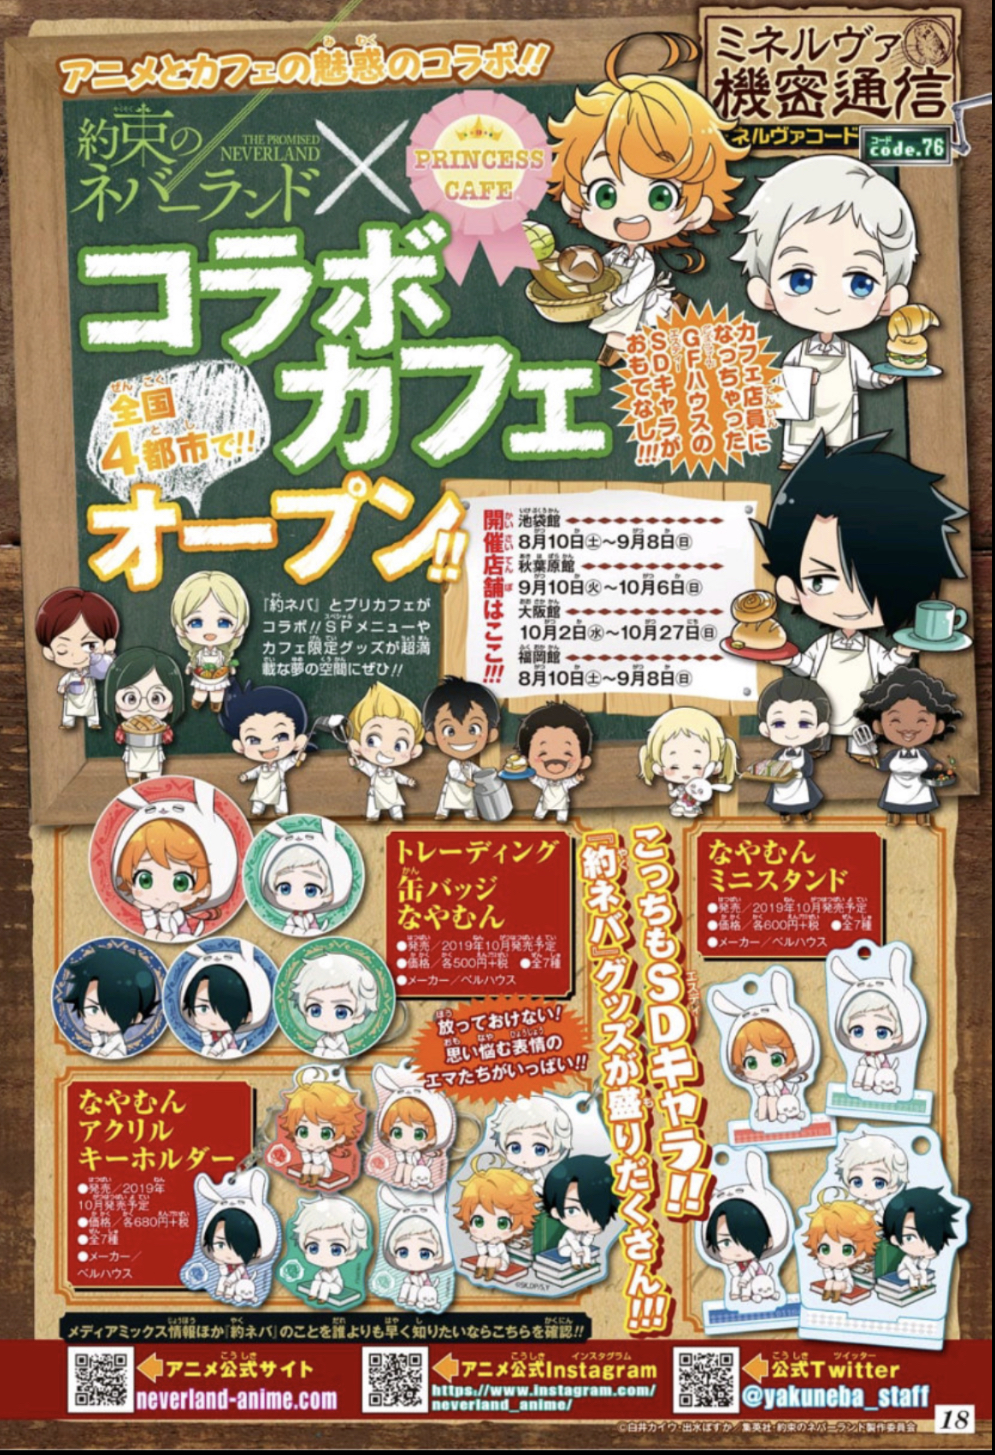 https://static.wikia.nocookie.net/yakusokunoneverland/images/b/bc/The_Promised_Neverland_princess_cafe_poster.png/revision/latest?cb=20220402084932